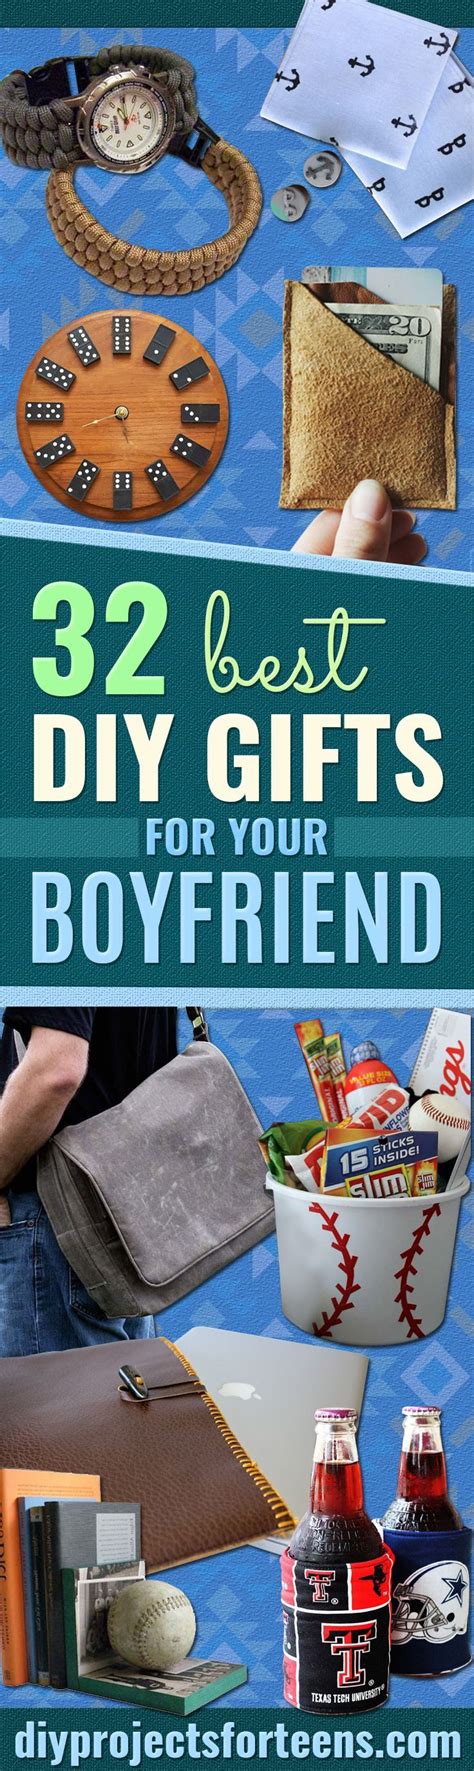 No worries, this gift guide is full of inexpensive boyfriend gifts under $20 that are cheap but don't look cheap. 32 DIY Gifts for Your Boyfriend | Diy gifts for boyfriend ...